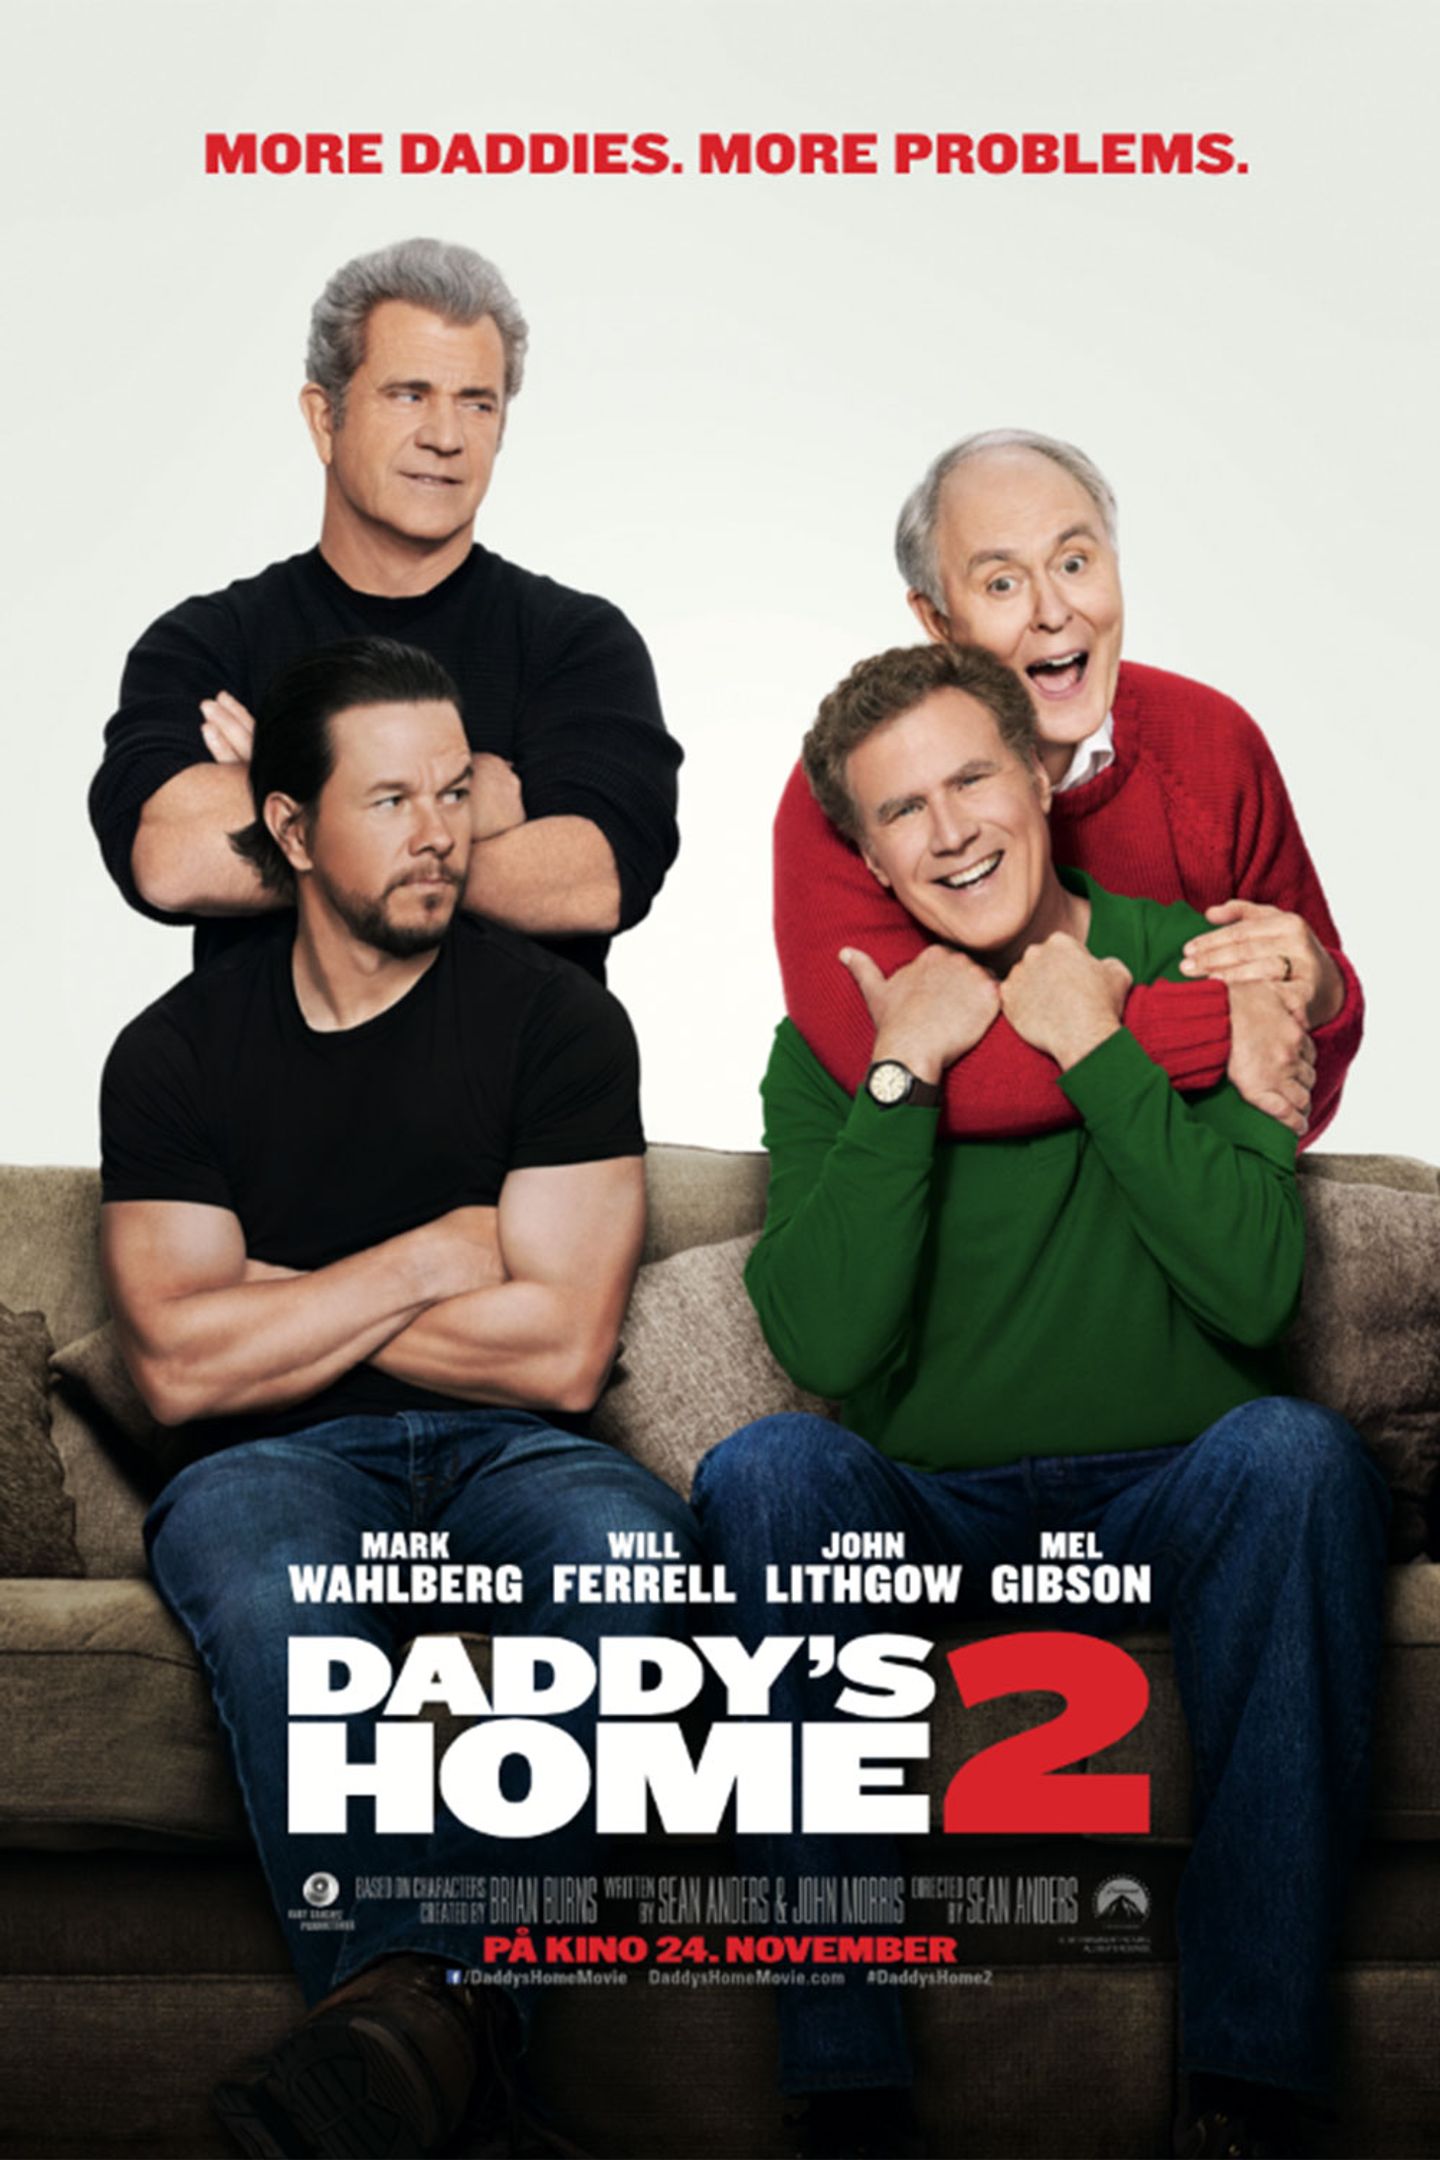 Plakat for 'Daddy's Home 2'